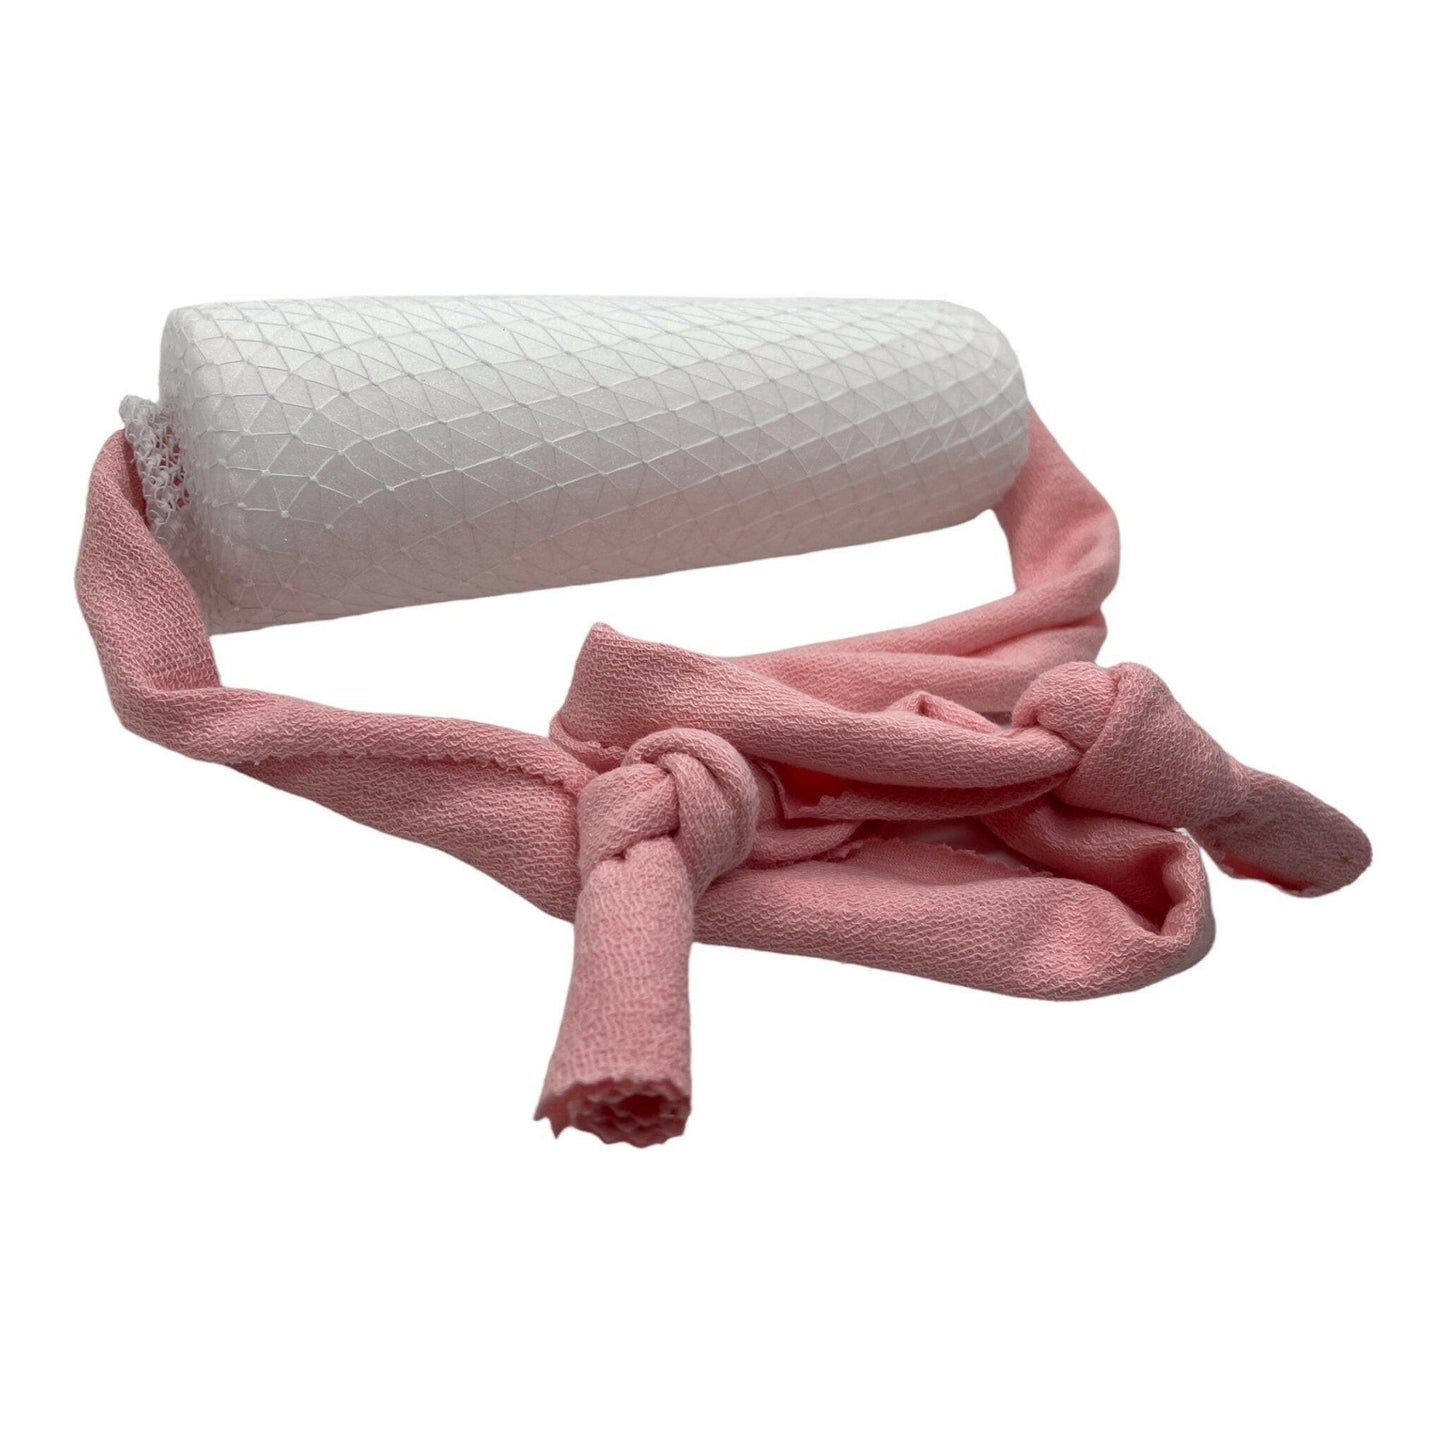 Hair Salon Neck Rest Cushion-Take Along Neck Support for Shampoo Sink-Neck Pillow for Beauty Salons-Pink with Tote.